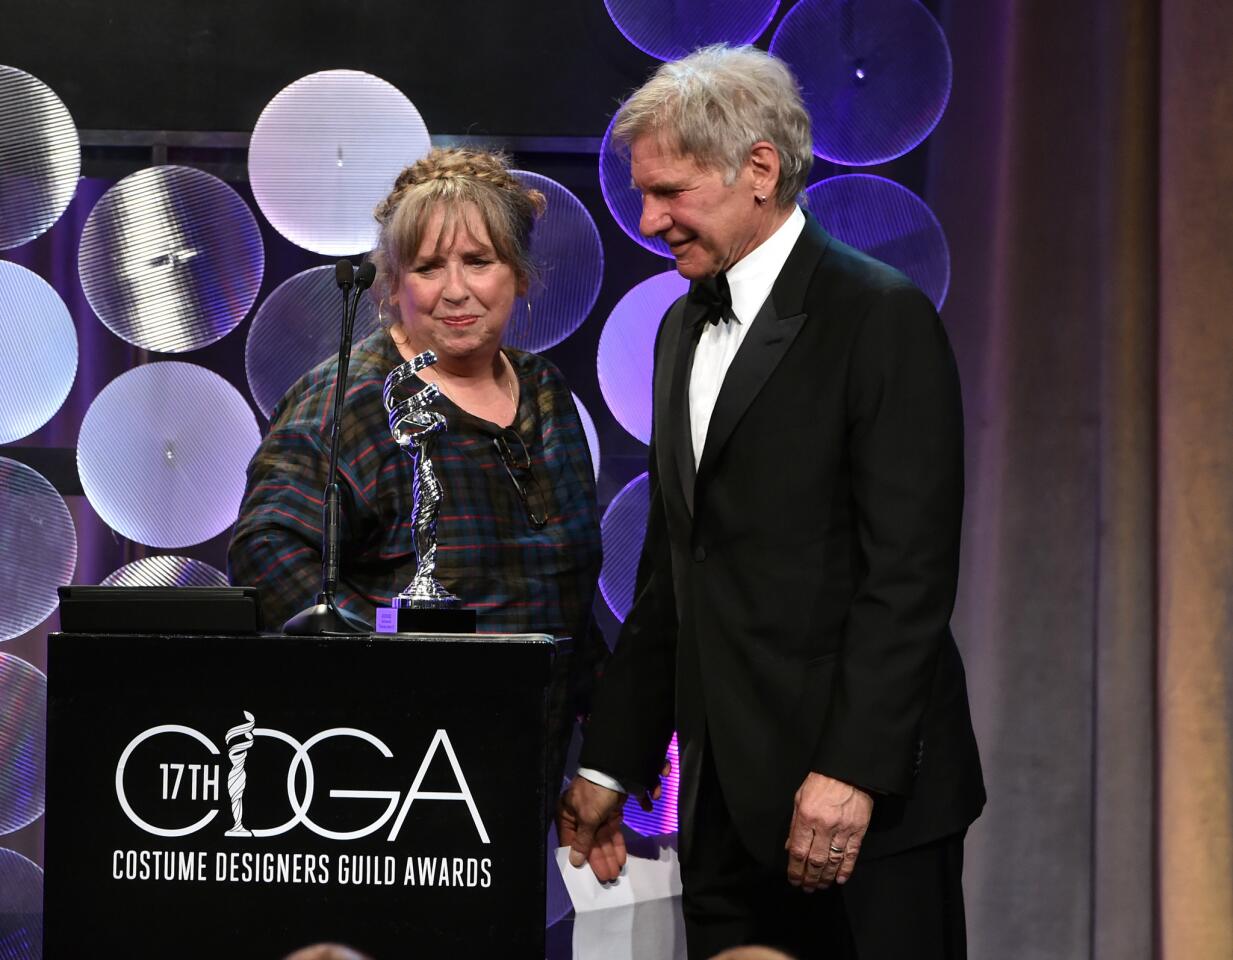 Costume designer Aggie Guerard Rodgers receives the career achievement award from longtime friend Harrison Ford.